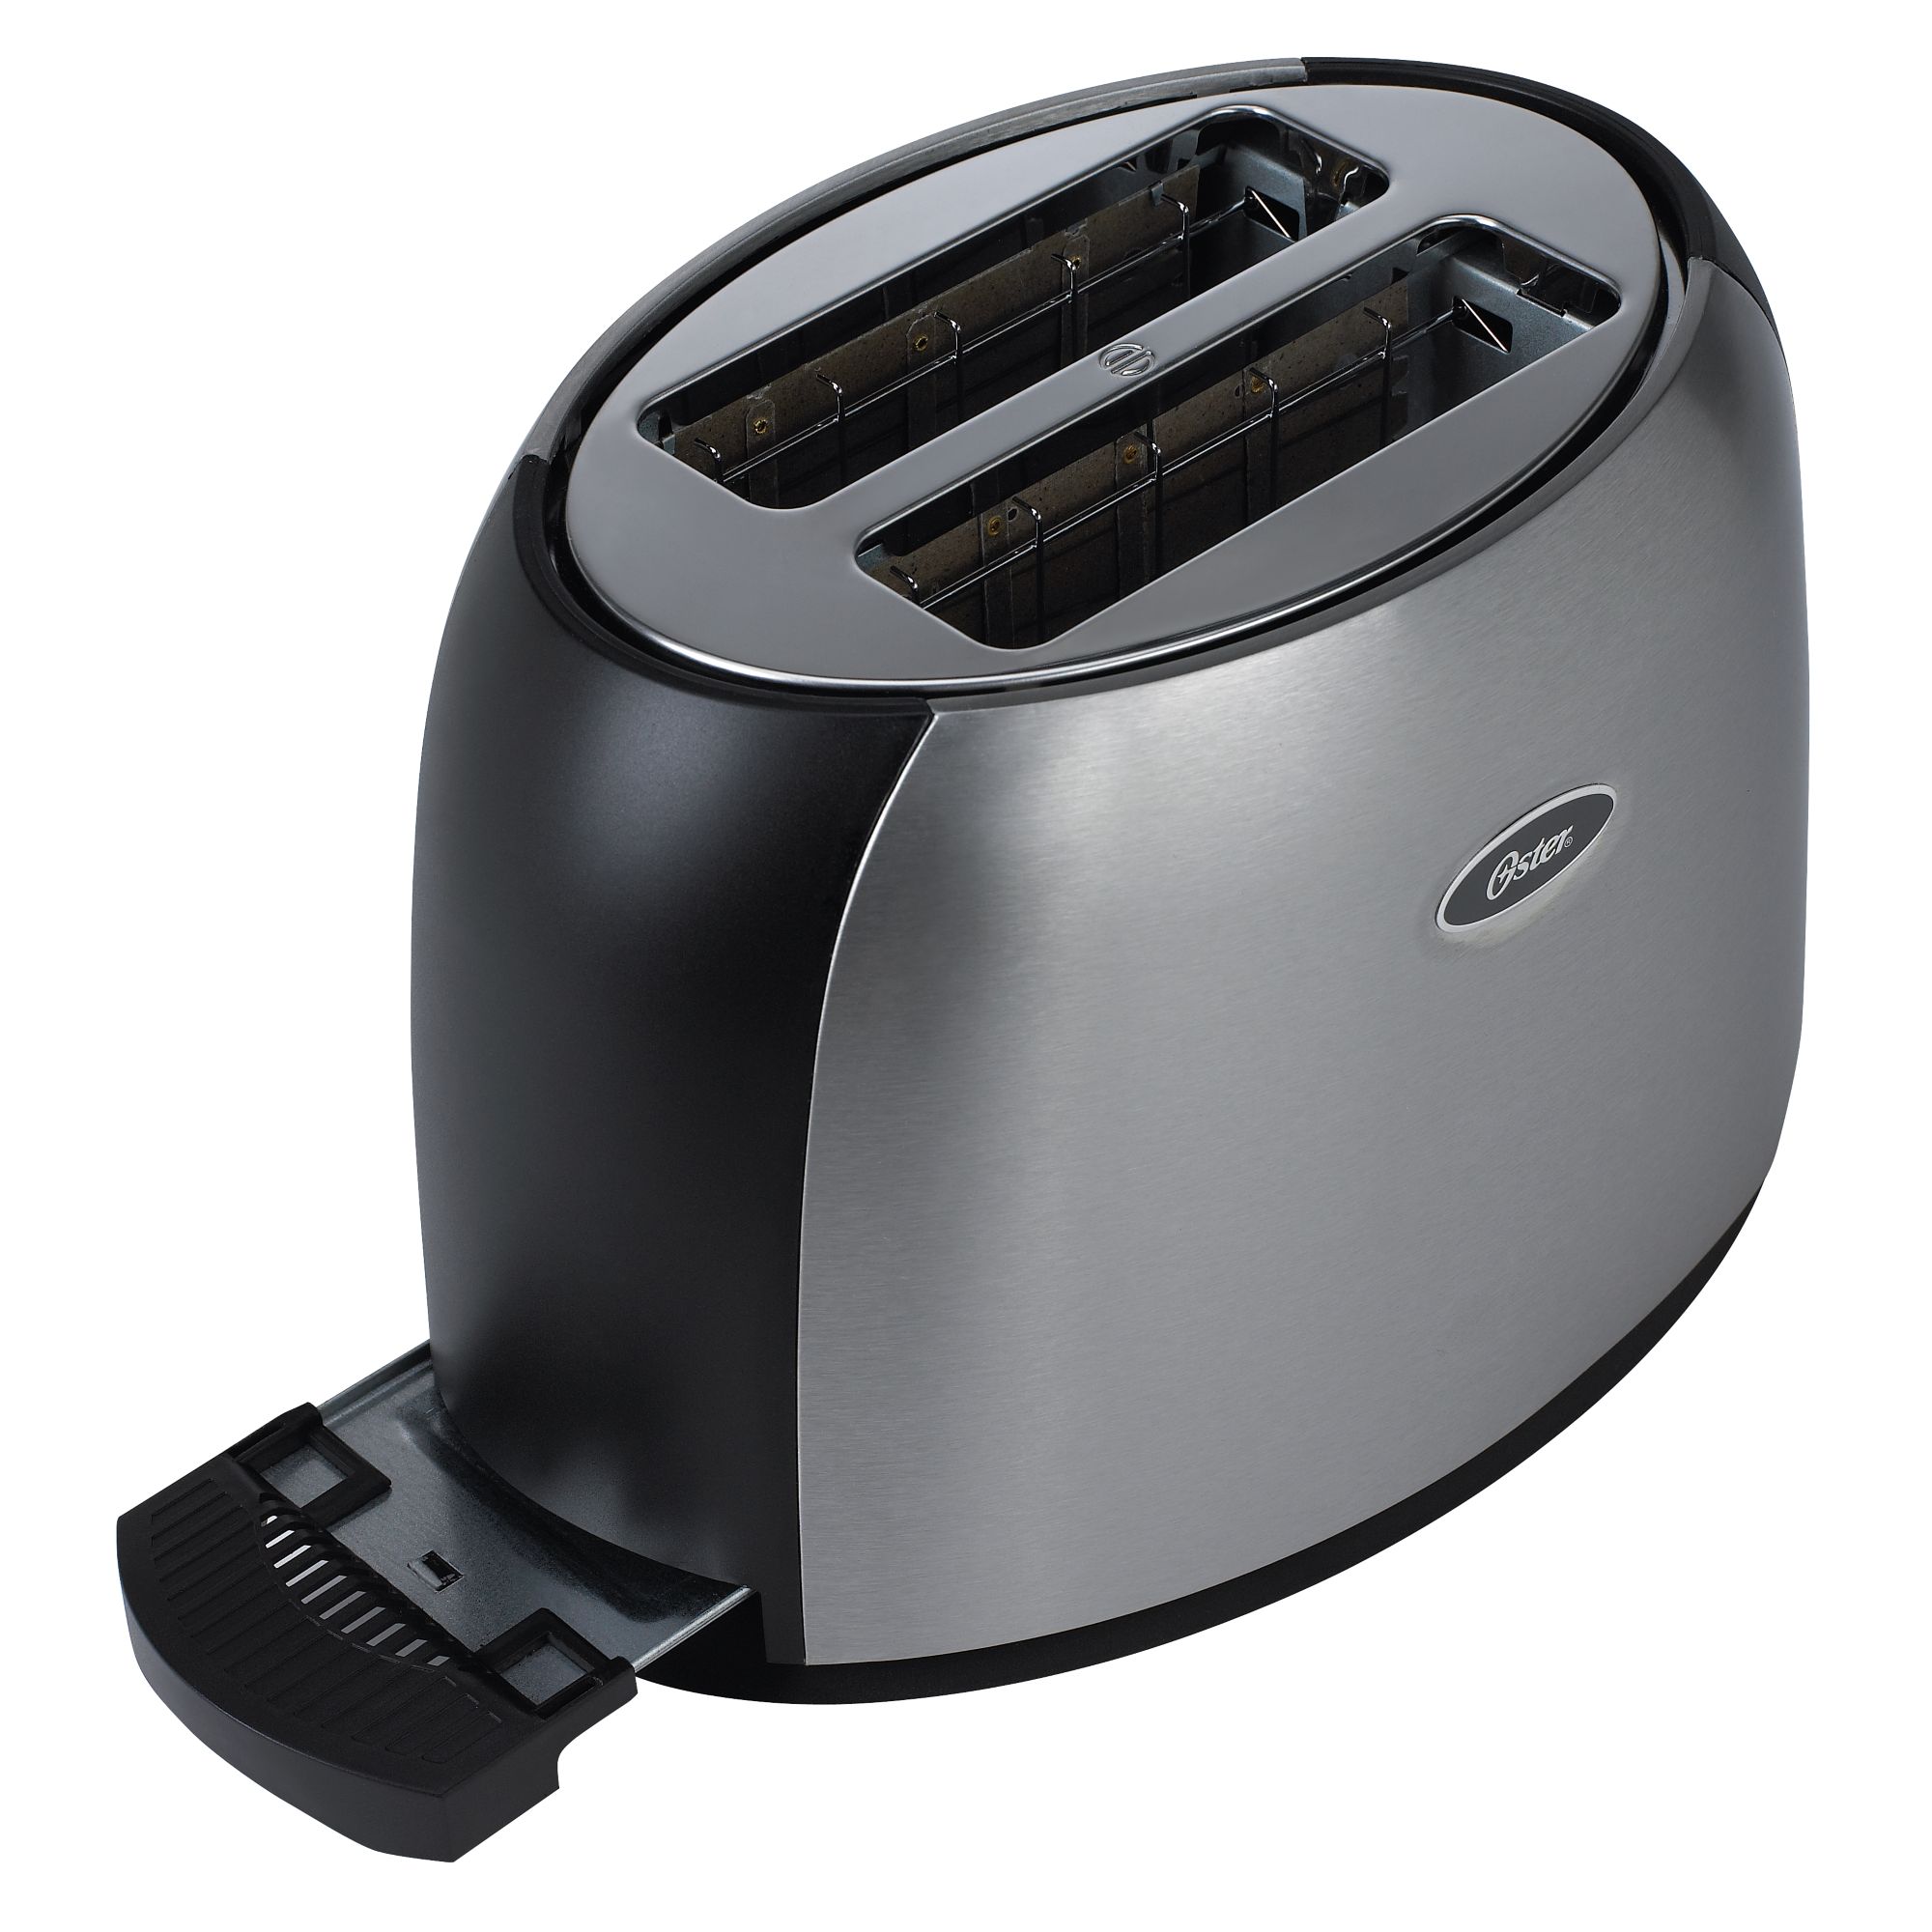 Oster® Extra Wide Slot Toaster, 2-Slice, 7.5 x 11 x 8, Stainless Steel